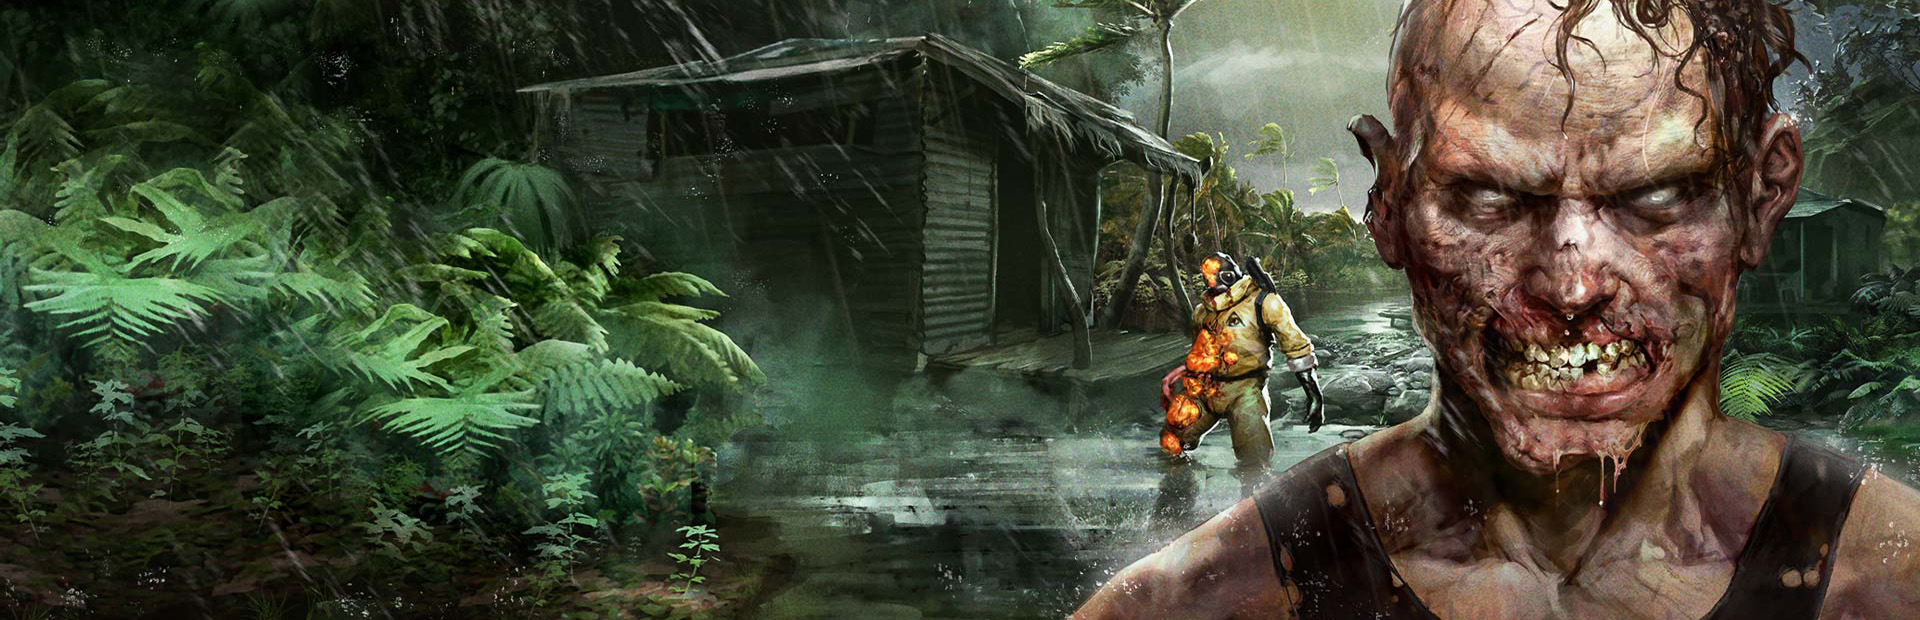 Dead Island: Riptide returns heroes to zombie-infested island, now with  boats and defensive perimeters - Polygon